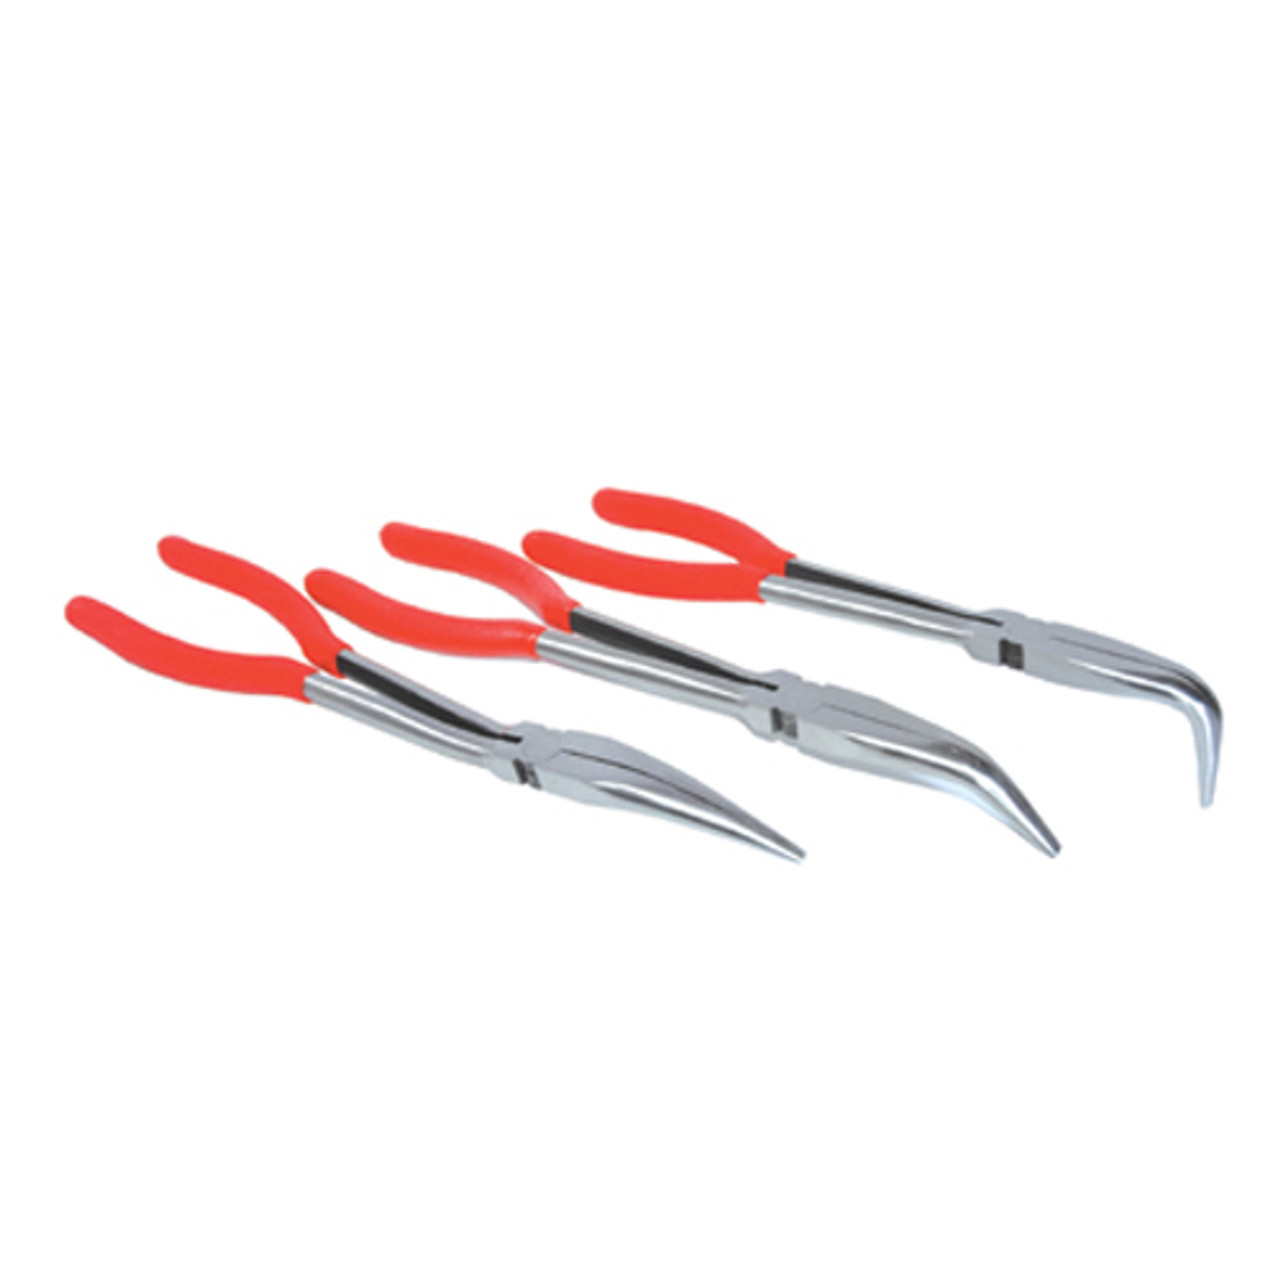 K Tool 51103 Needle Nose Pliers Set, 3 Piece, 11 Long, with Straight, 45  Degree and 90 Degree, in Pouch